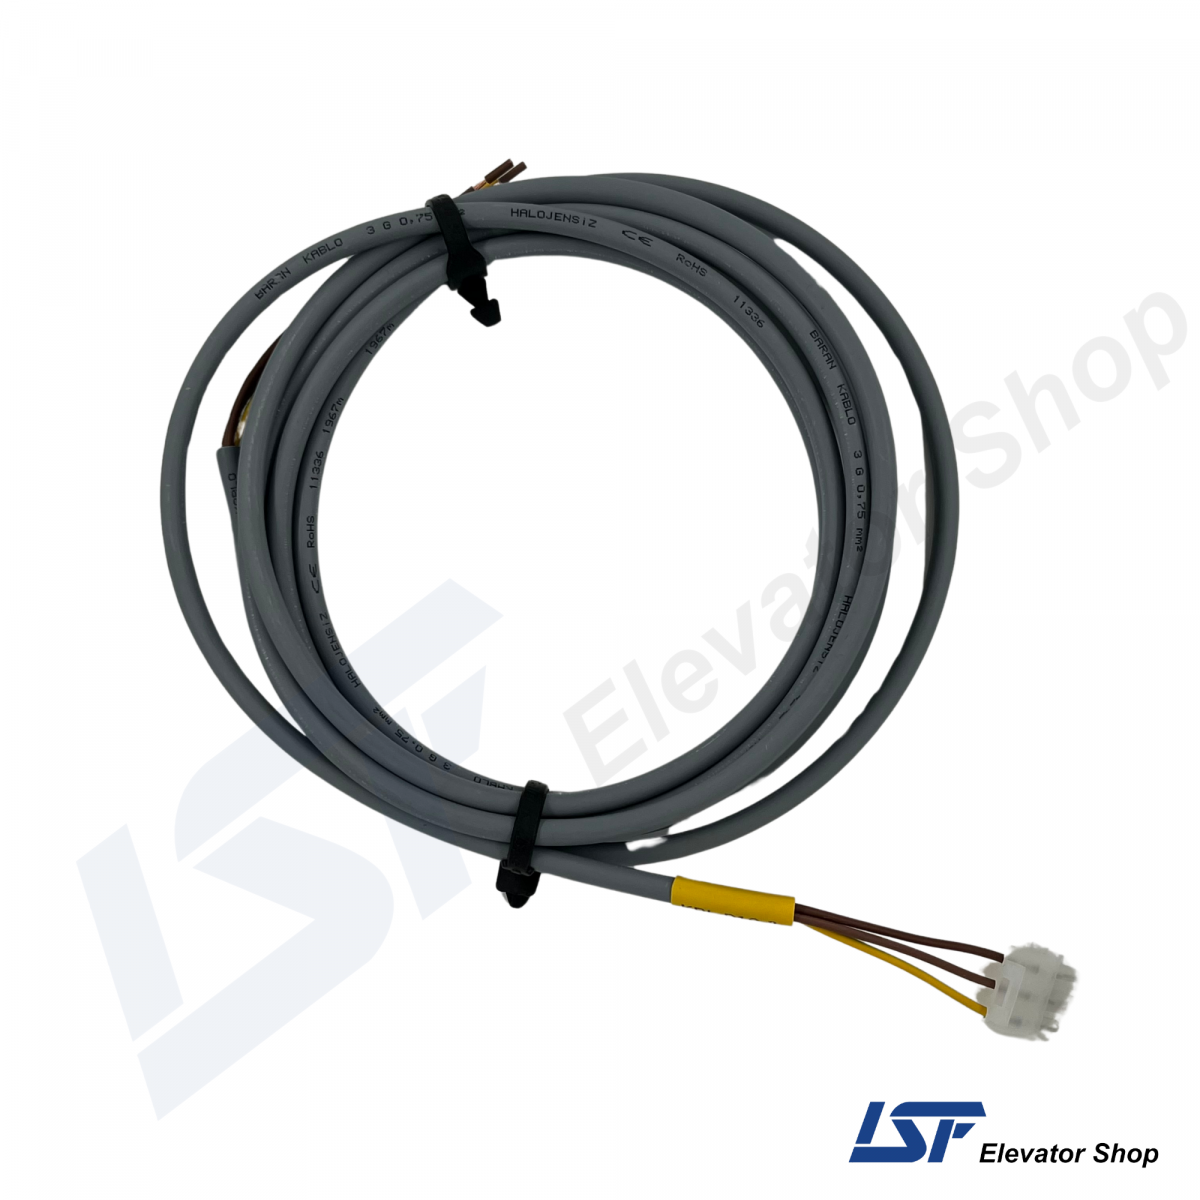 KBL-D1C-2 Arkel Door Contacts Cable 3m. for Elevator Systems (2)